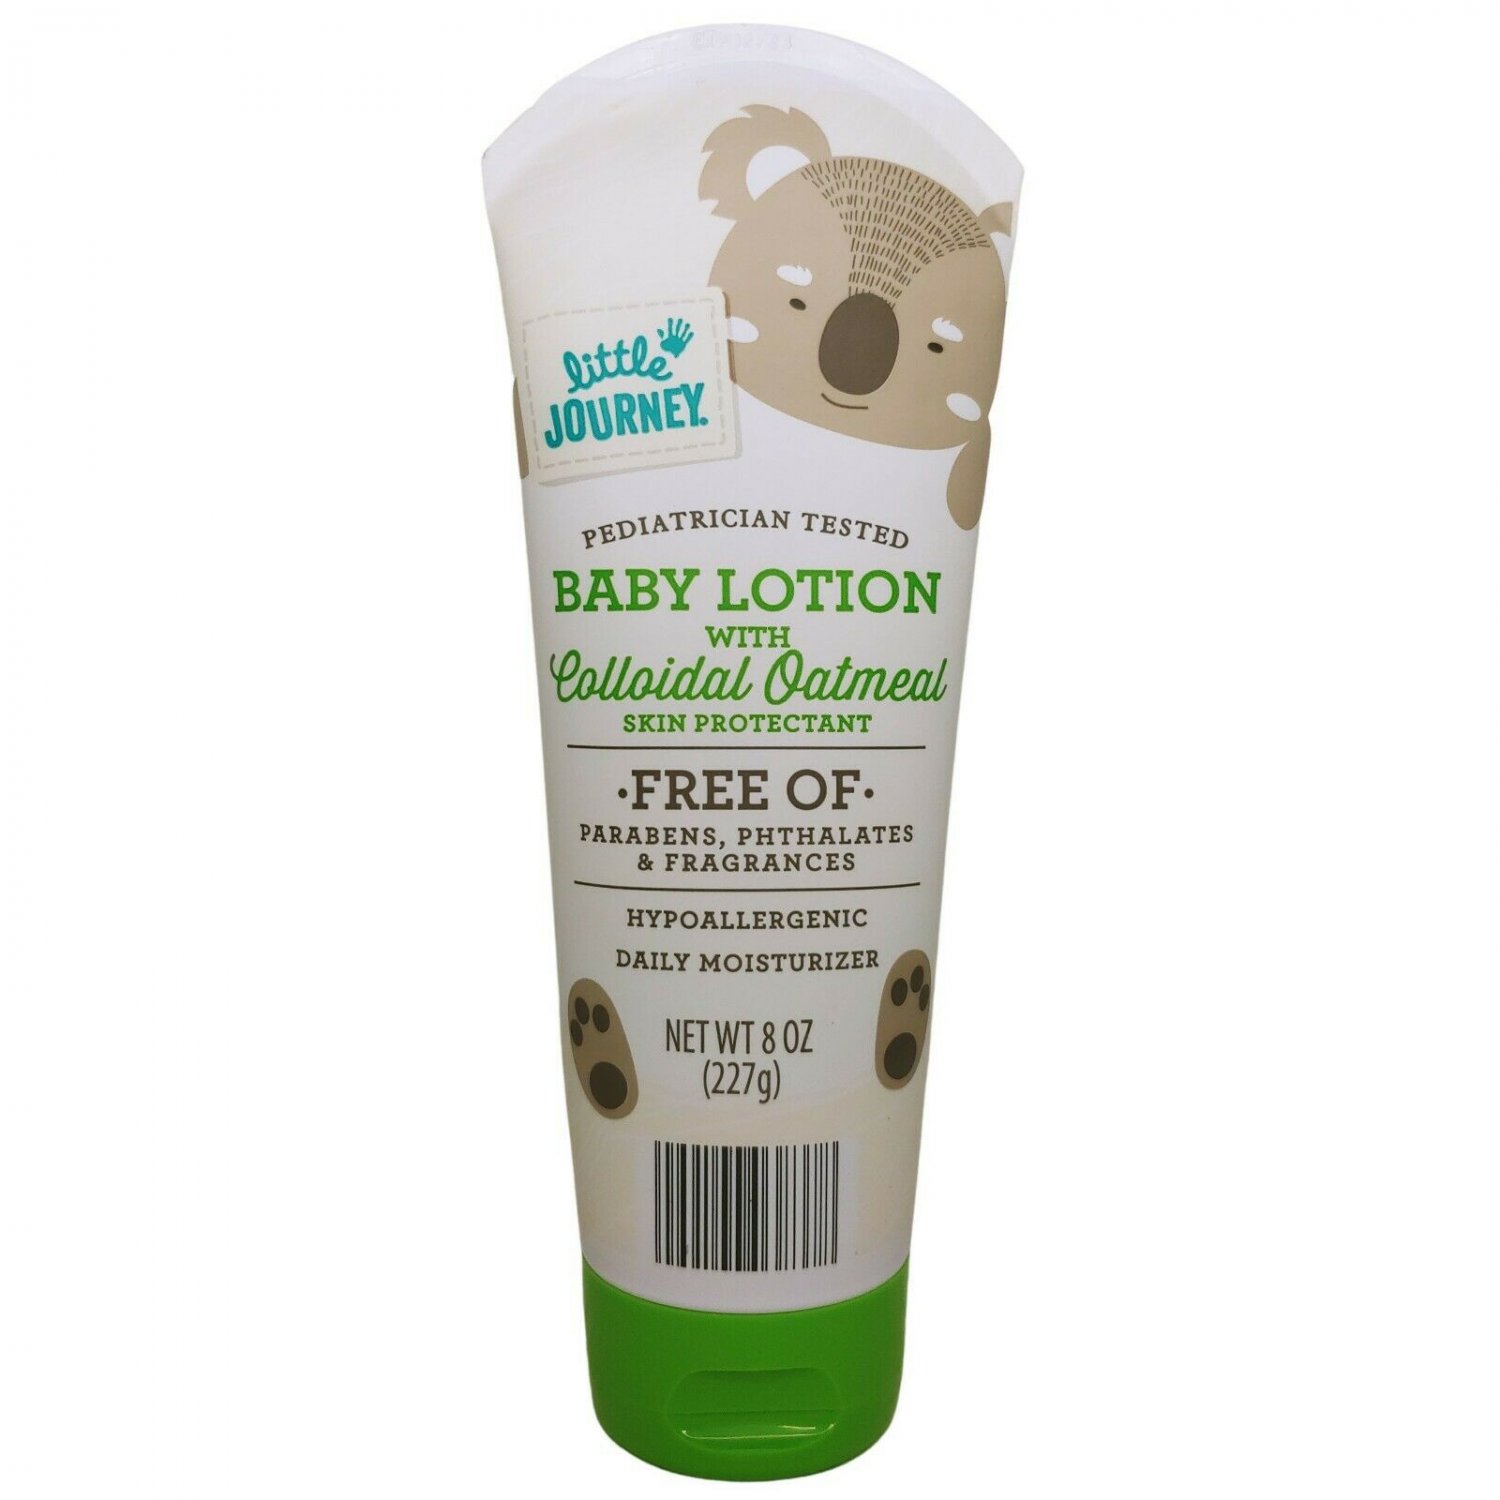 Little Journey Baby Lotion, Colloidal Oatmeal Skin Protectant, 227 g (8 oz)